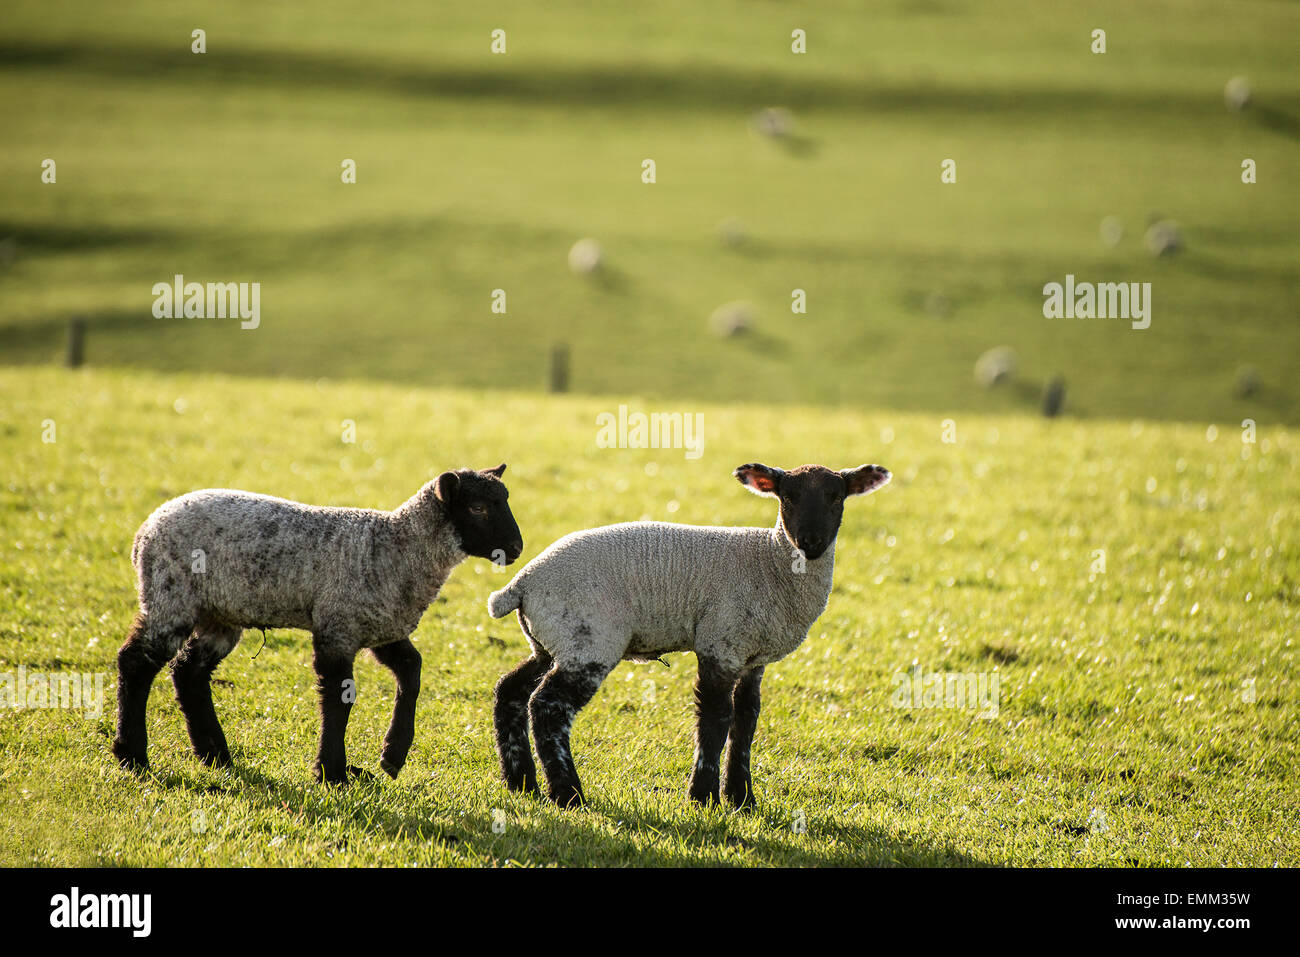 Beauitful landscape image of Spring lambs and sheep in fields during late evening light Stock Photo